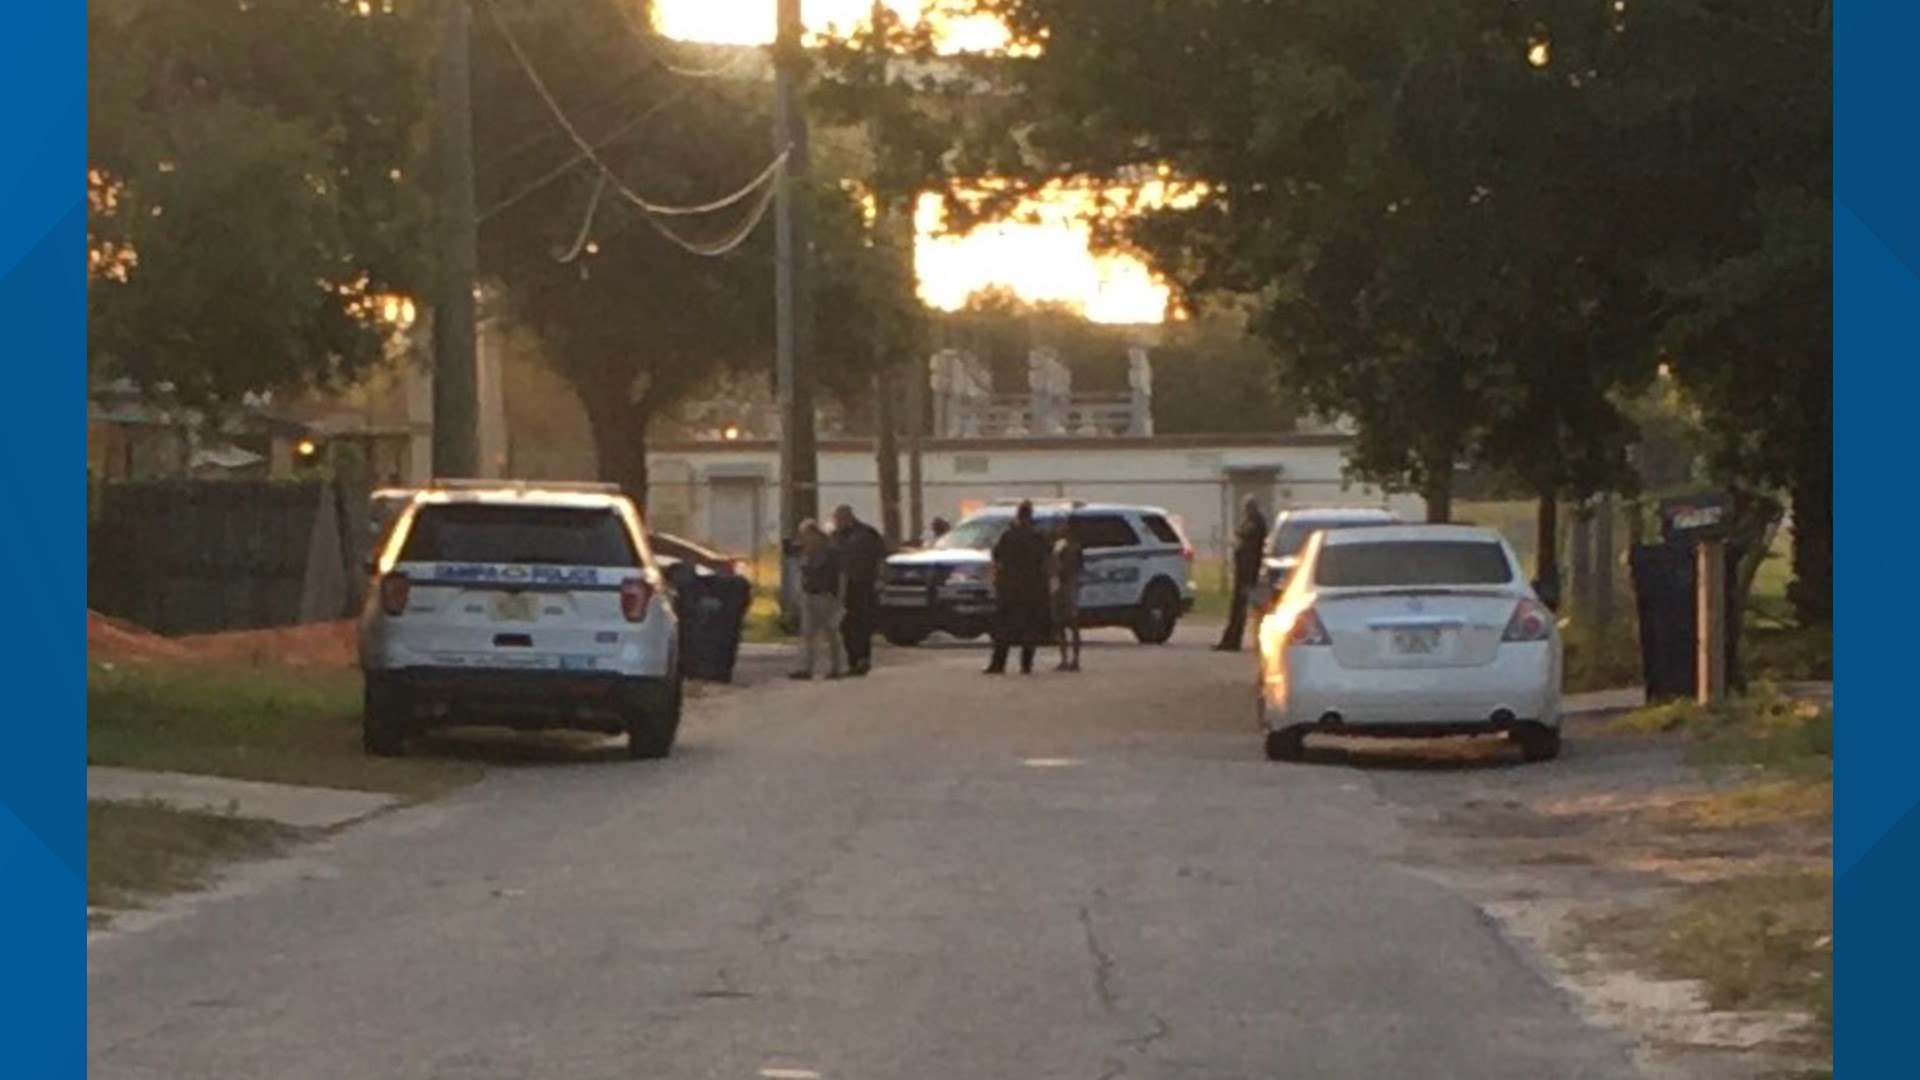 Tampa Police Swat Team Called To Standoff In Ybor City 6779